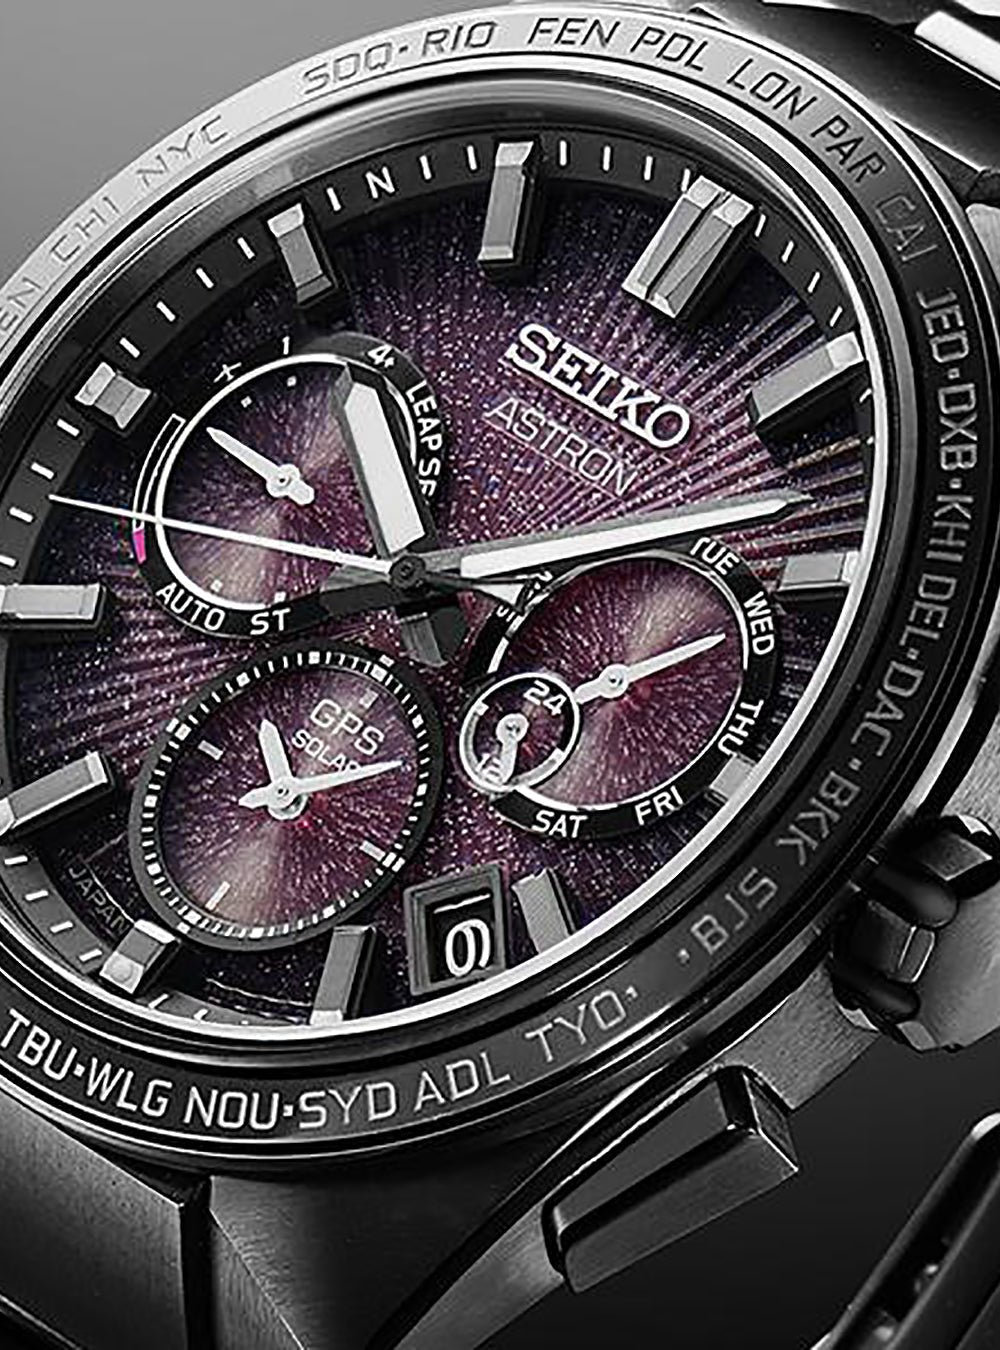 SEIKO ASTRON NEXTER GPS SOLAR SBXC123 / SSH123 MADE IN JAPAN LIMITED EDITION JDMWRISTWATCHjapan-select